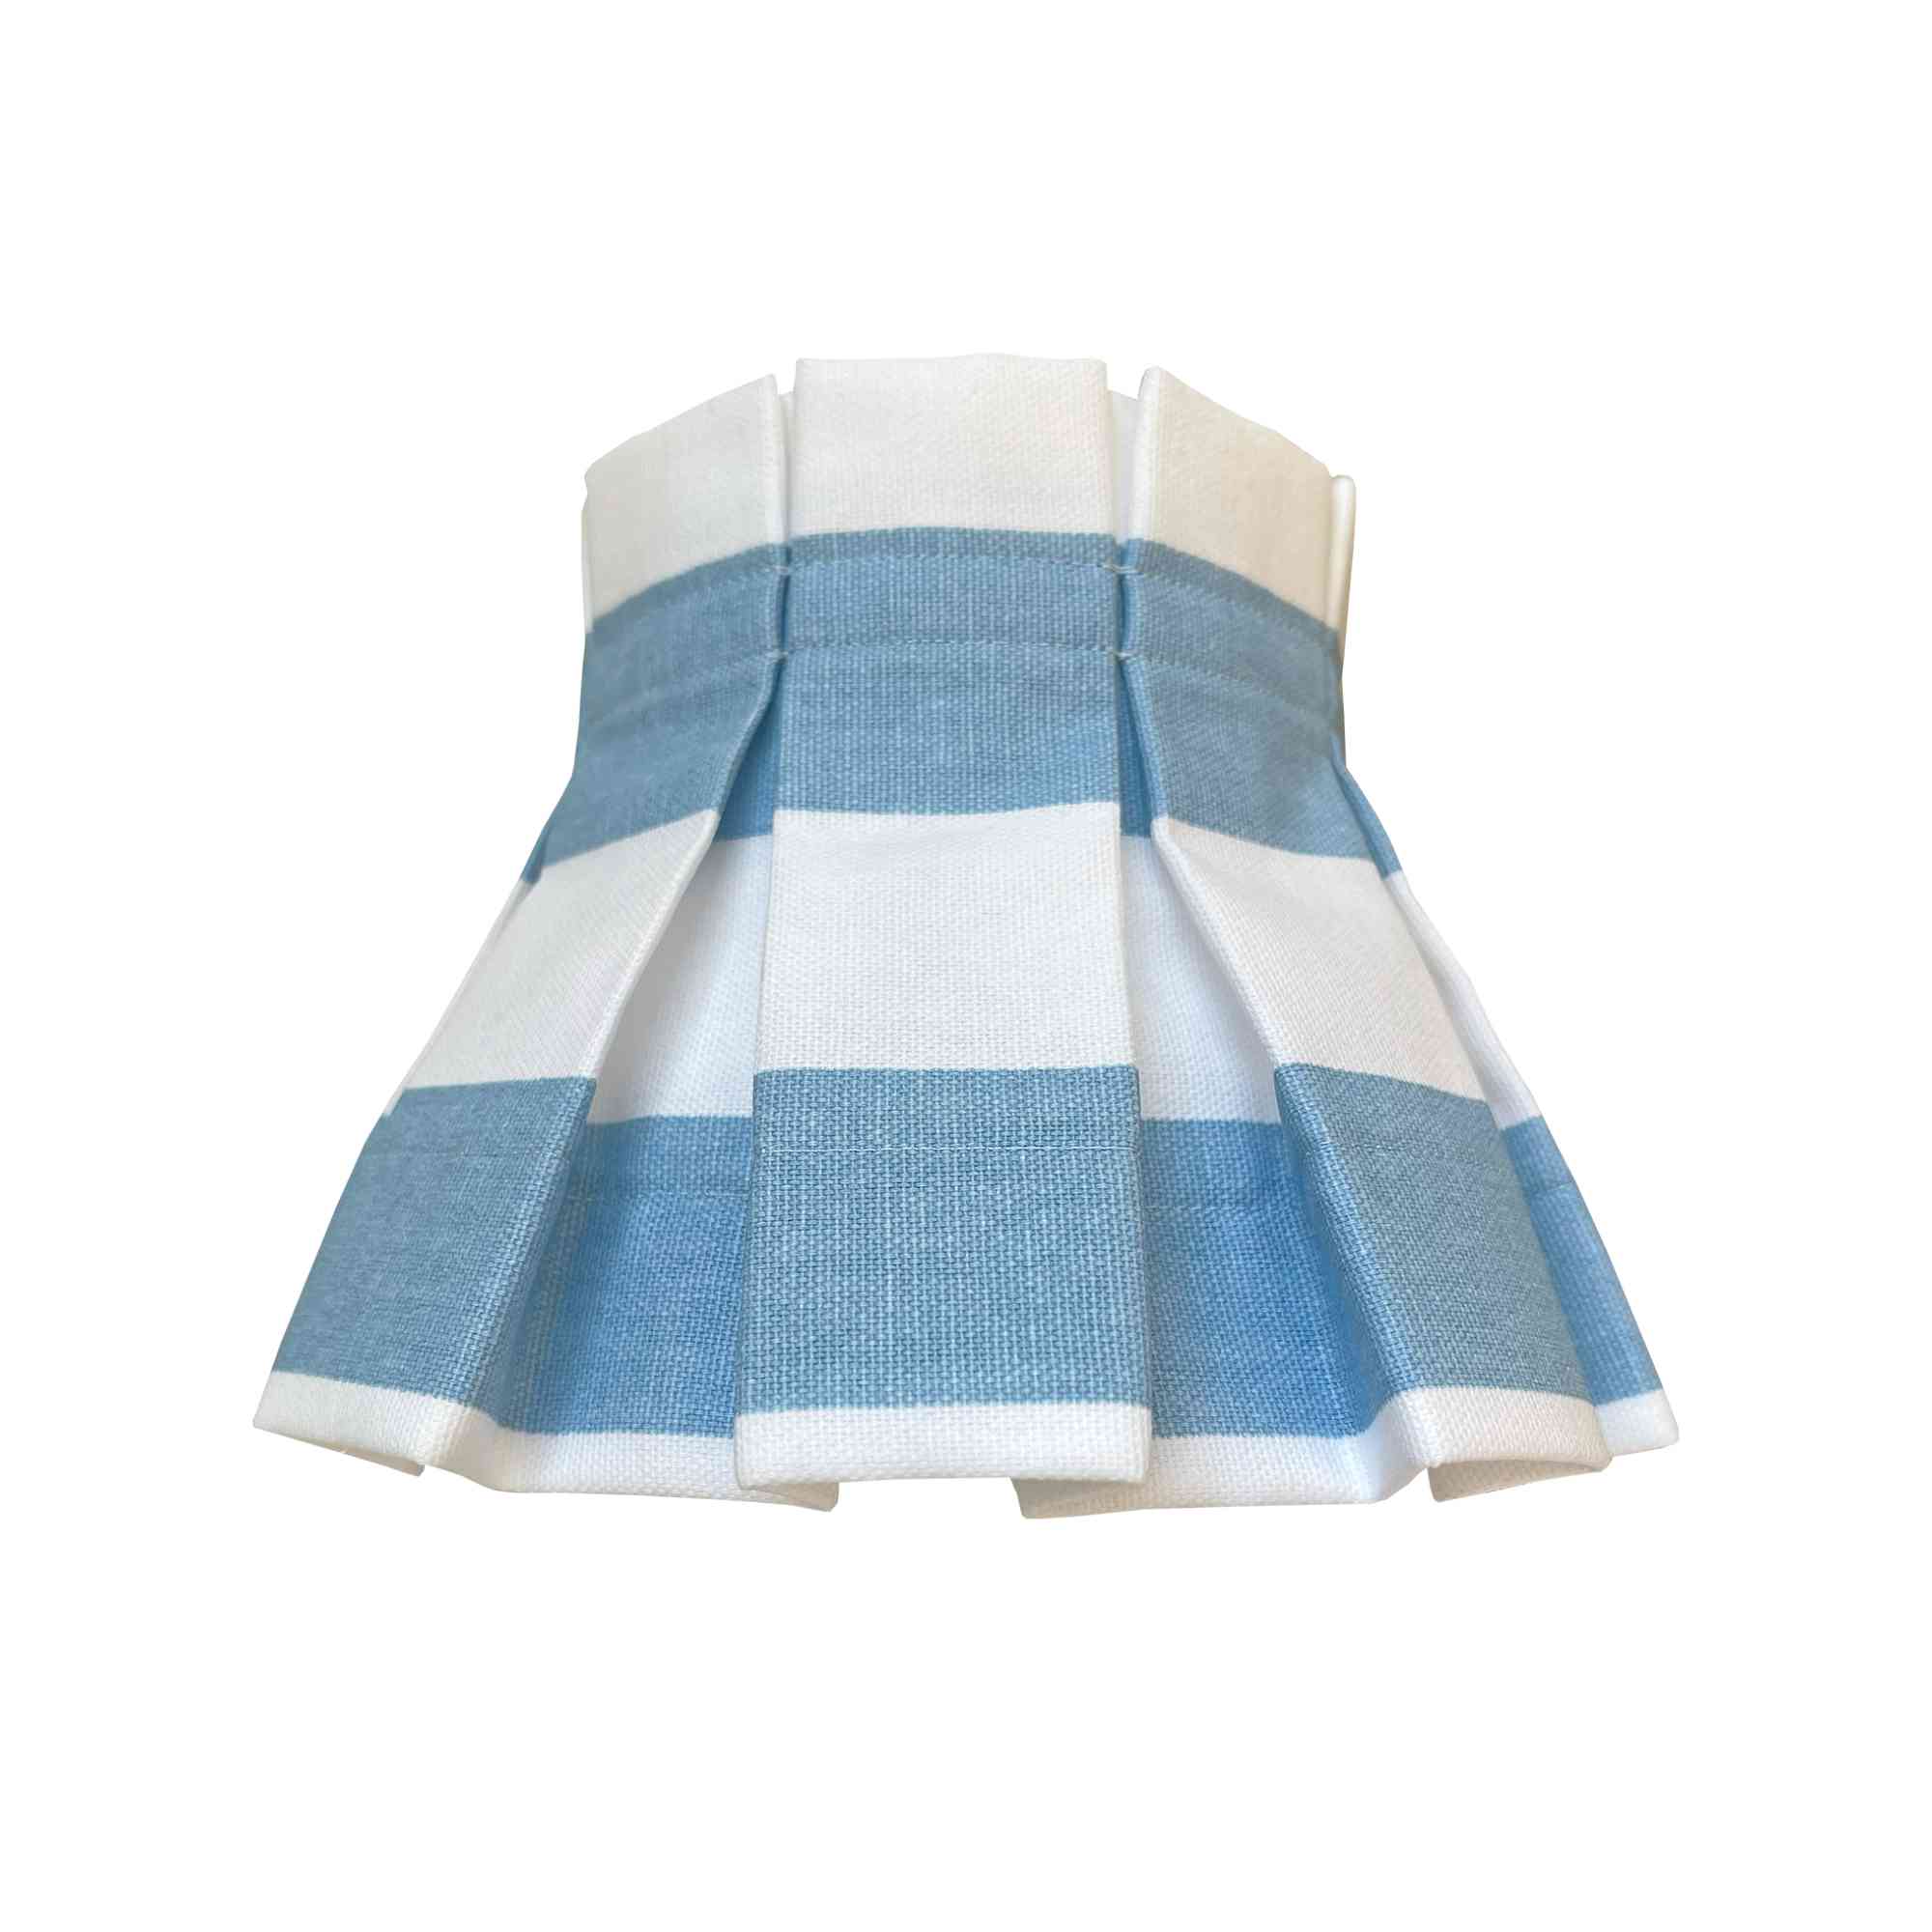 white and blue striped lampshade in pleated style brings a clean and coastal vibe.